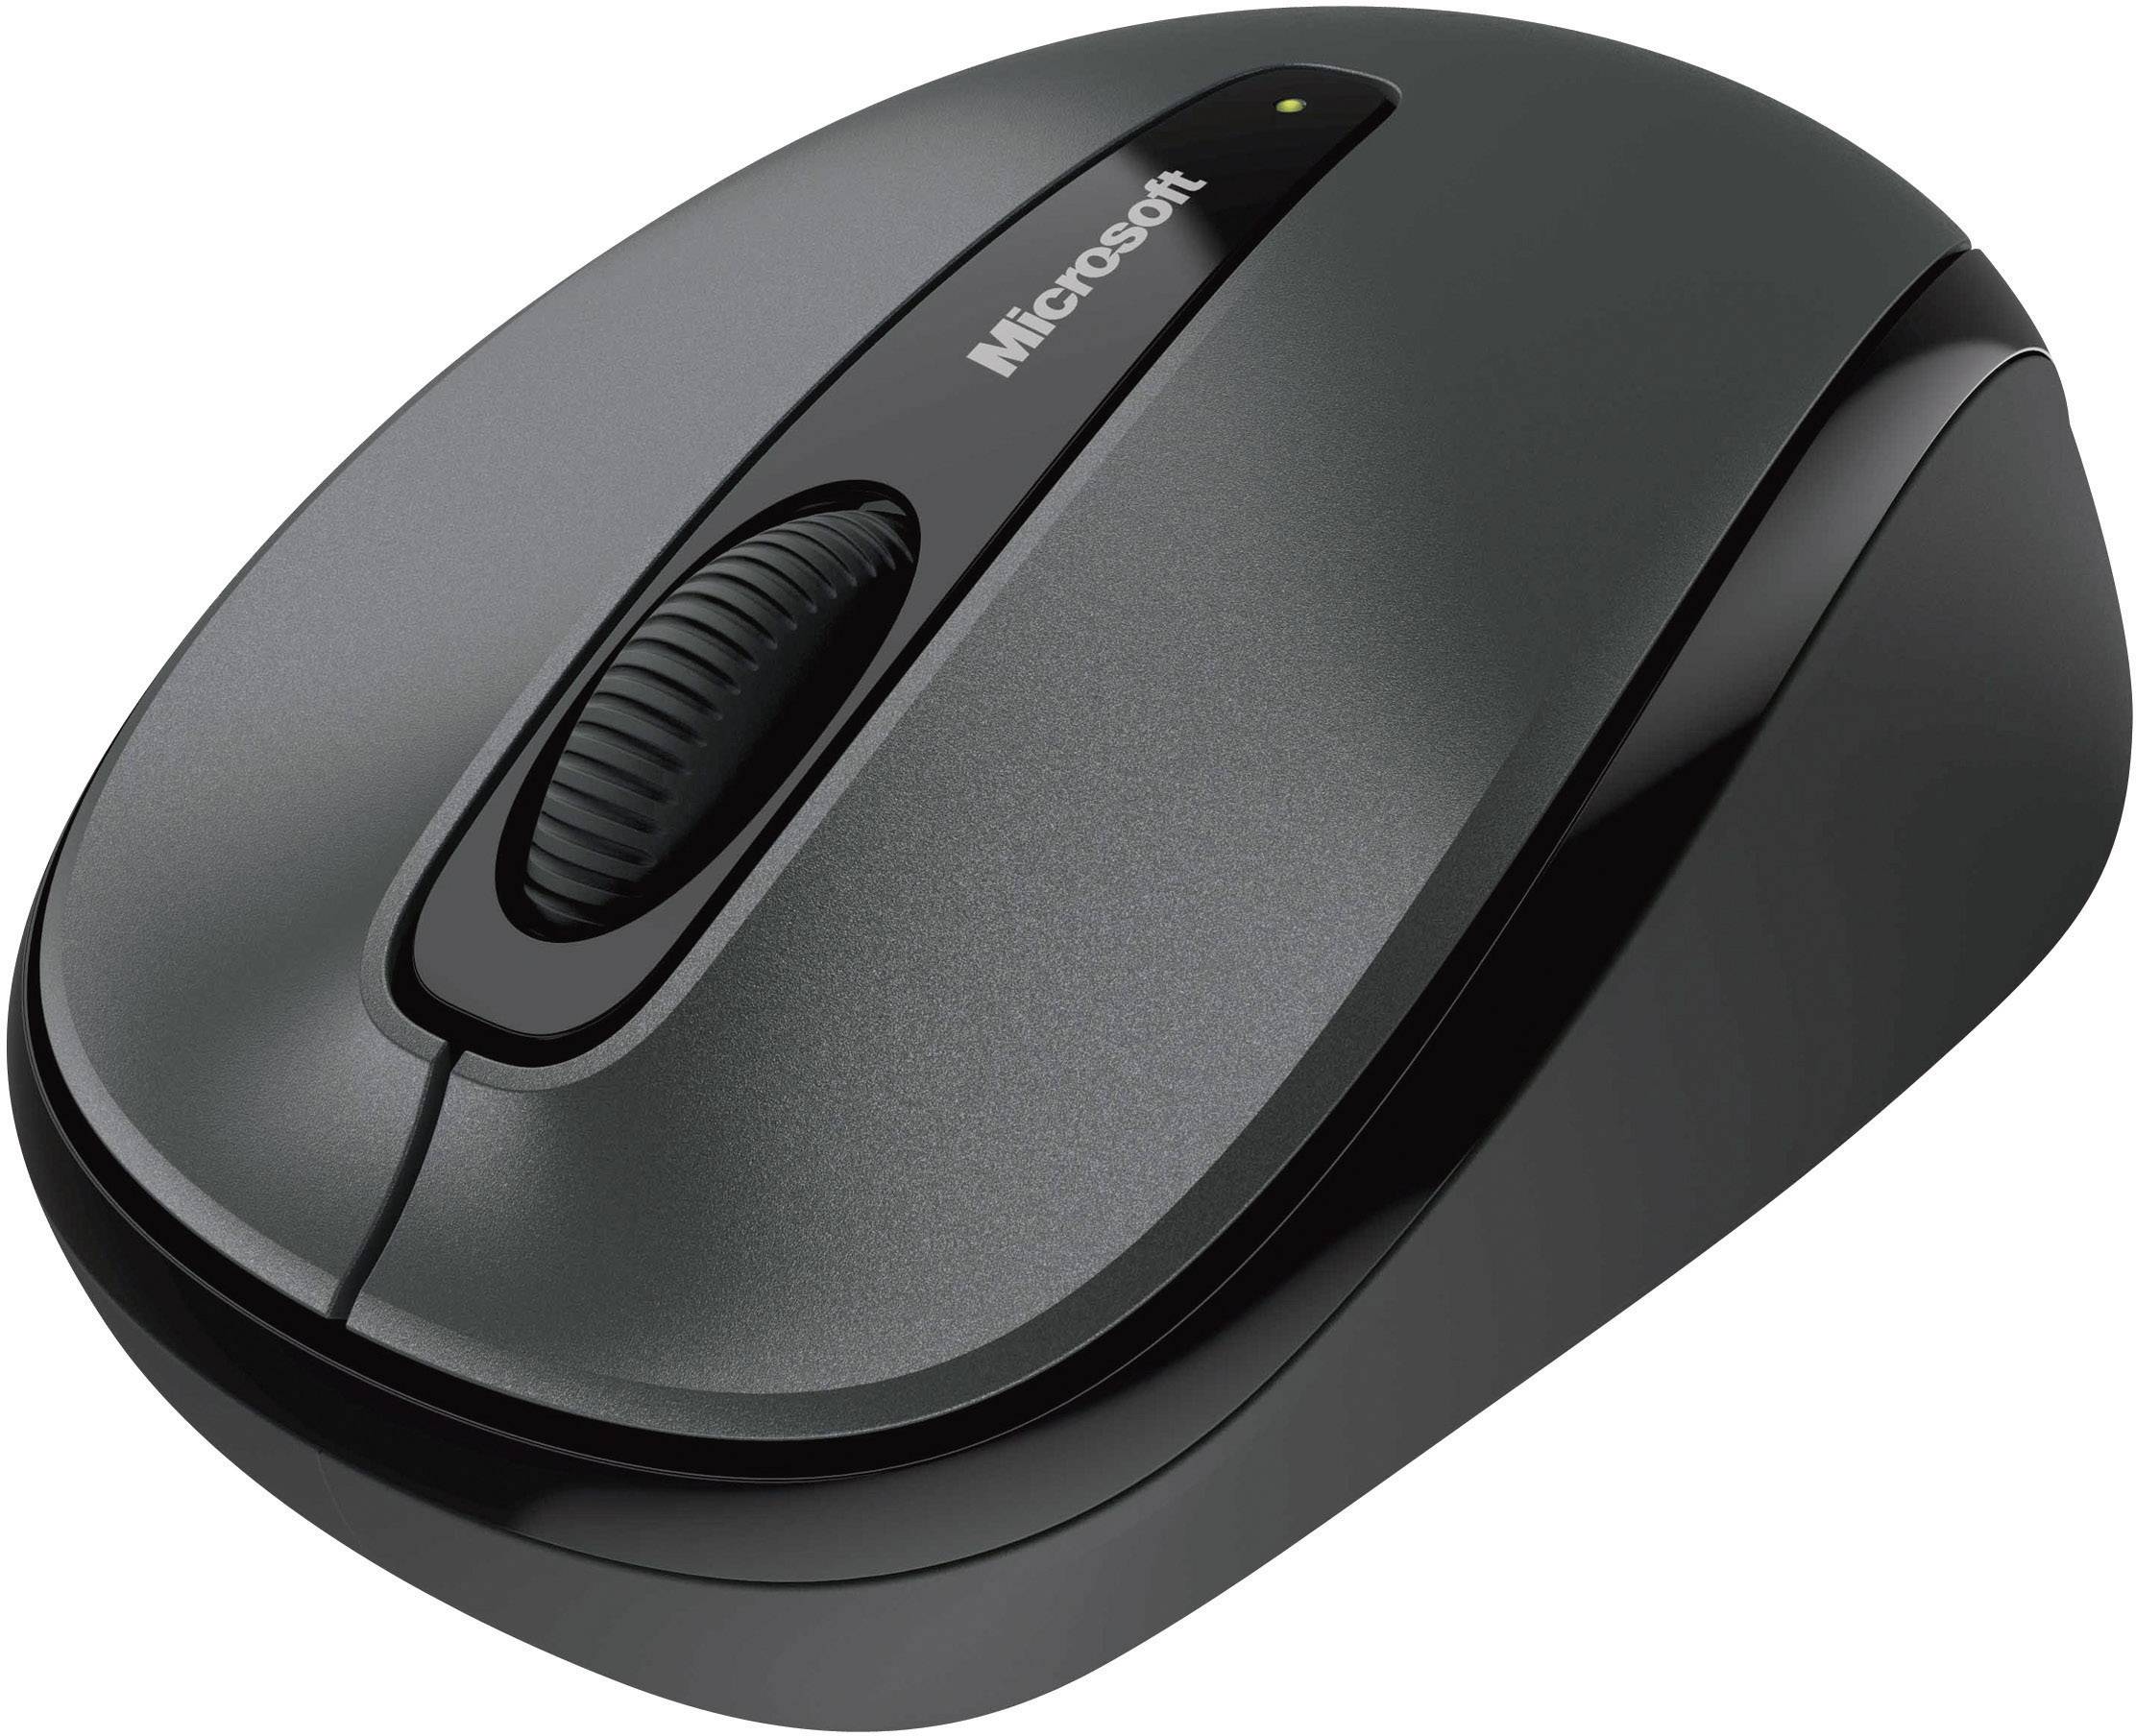 update microsoft mouse 3500 driver for mac